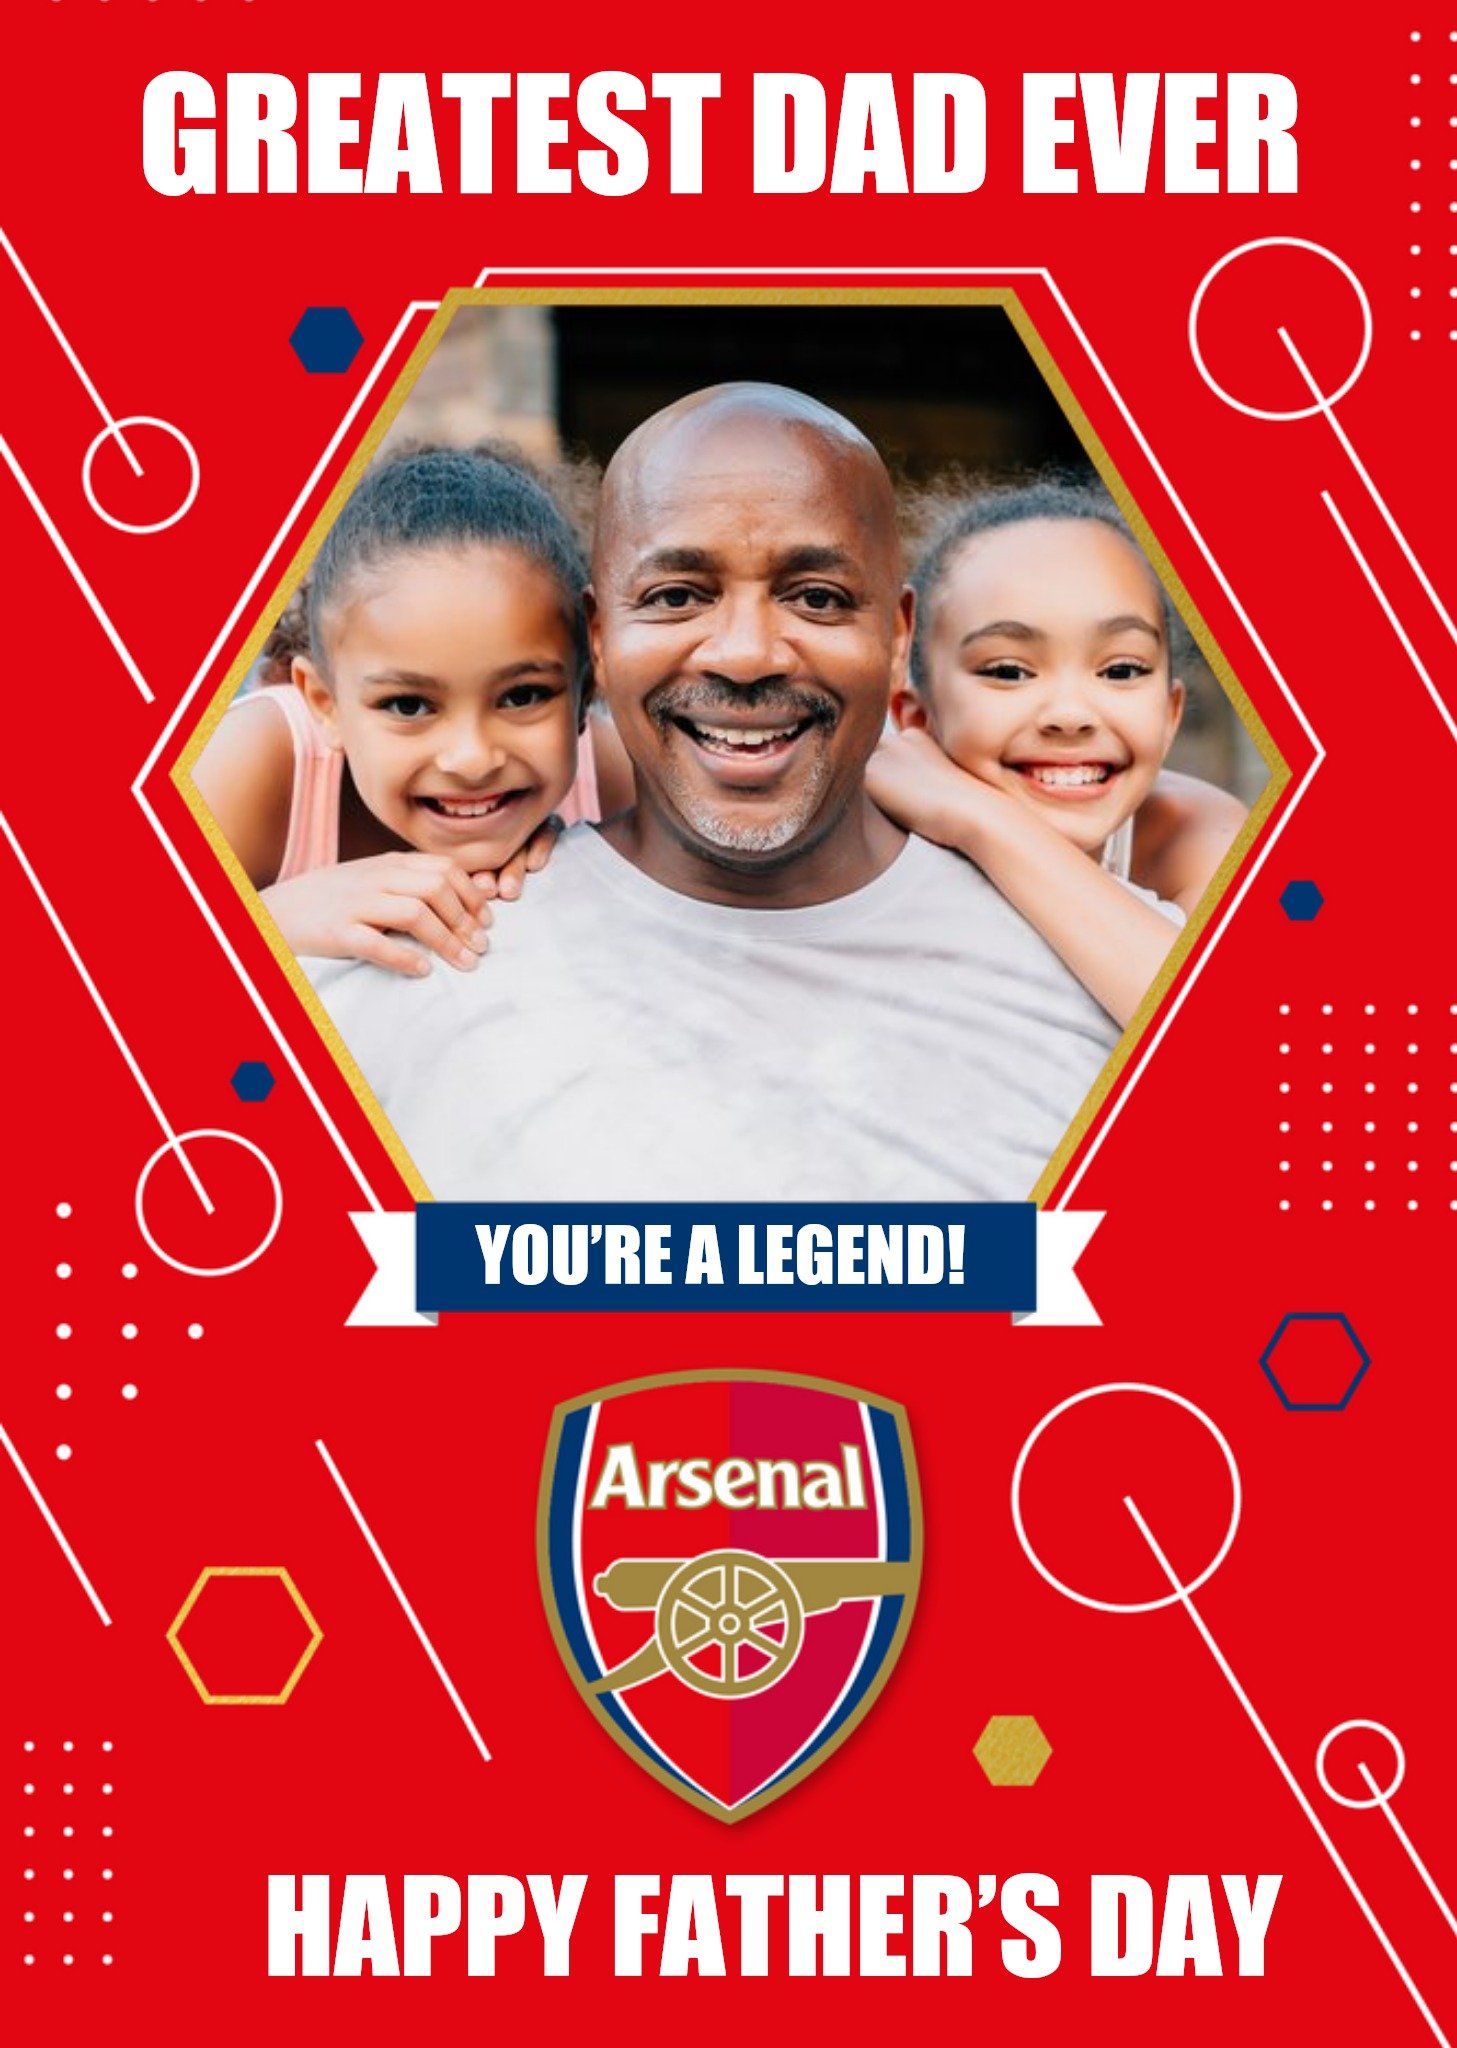 Arsenal Fc Football Legend Greatest Dad Ever Photo Upload Fathers Day Card Ecard